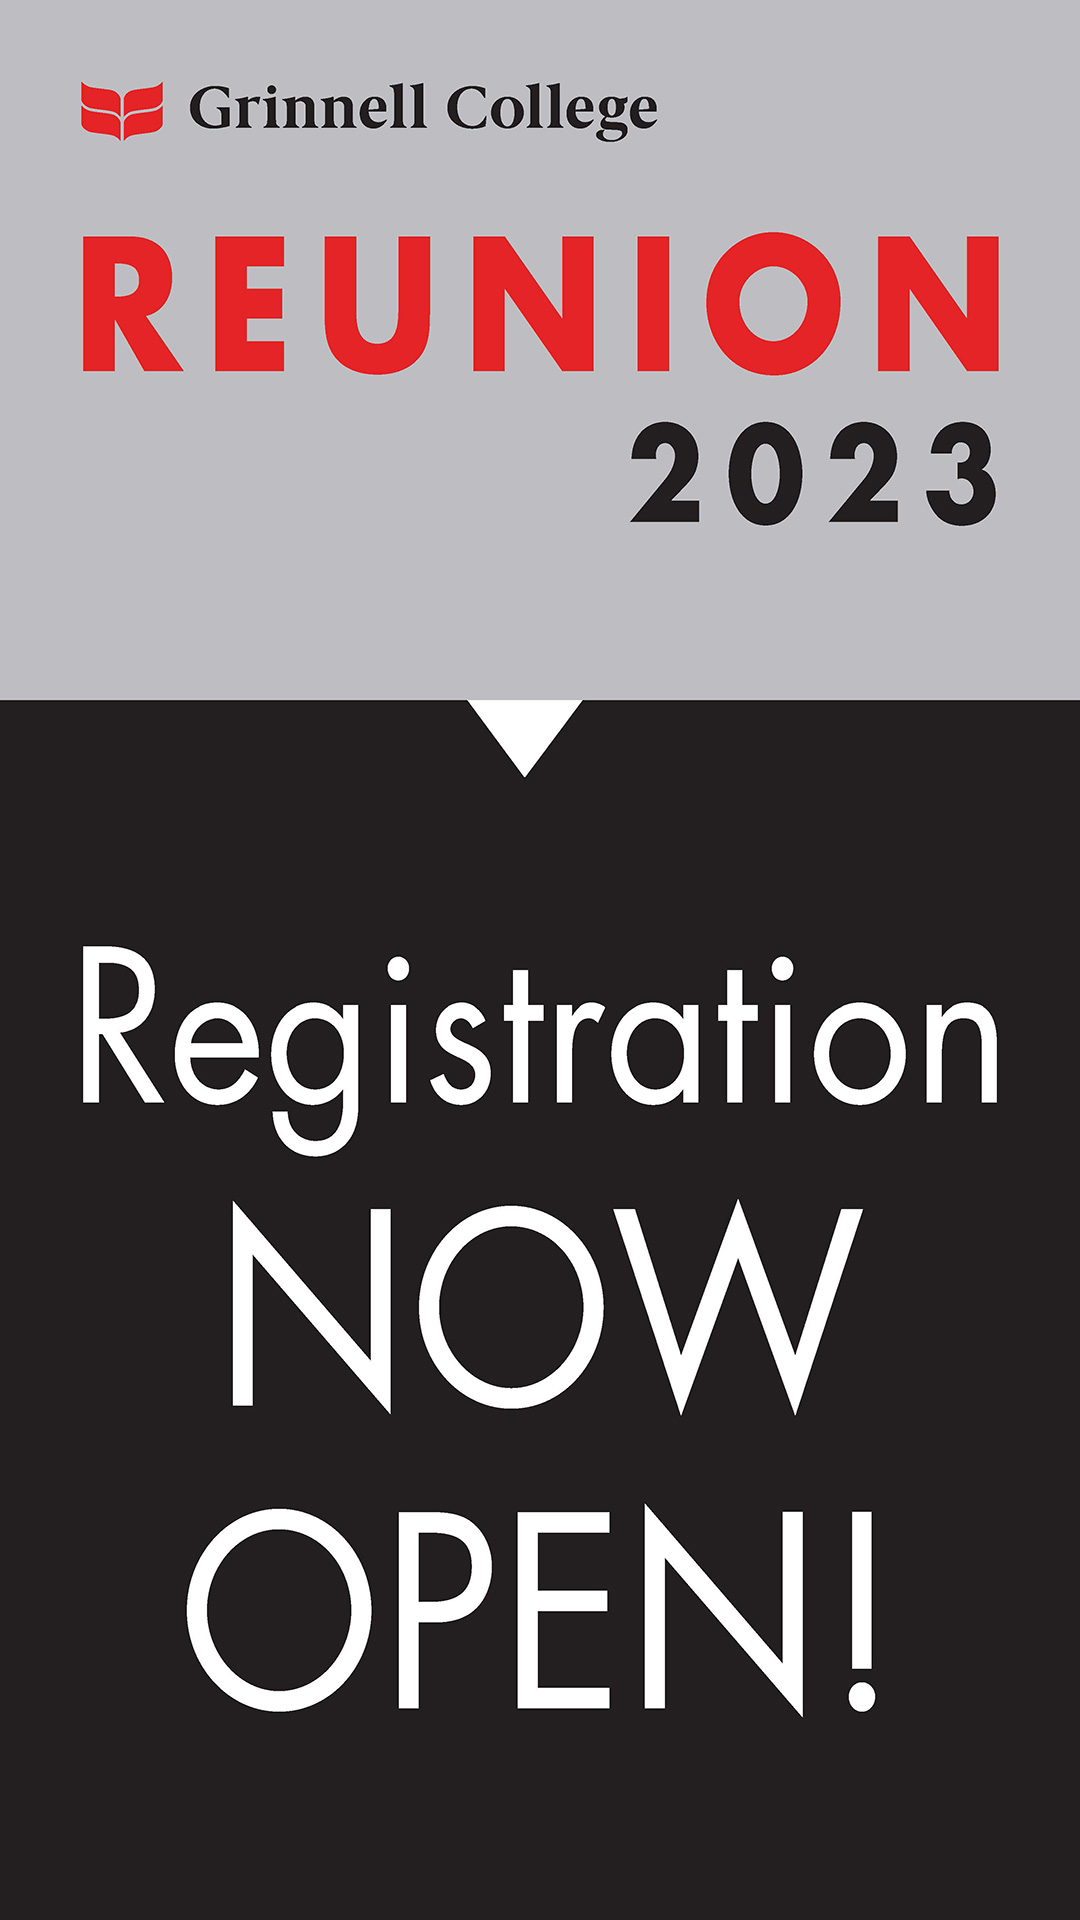 Two sections of text. First section Red and Black text over a gray background. Text: Reunion 2023. Second section white text over black background. Text: Registration now open!